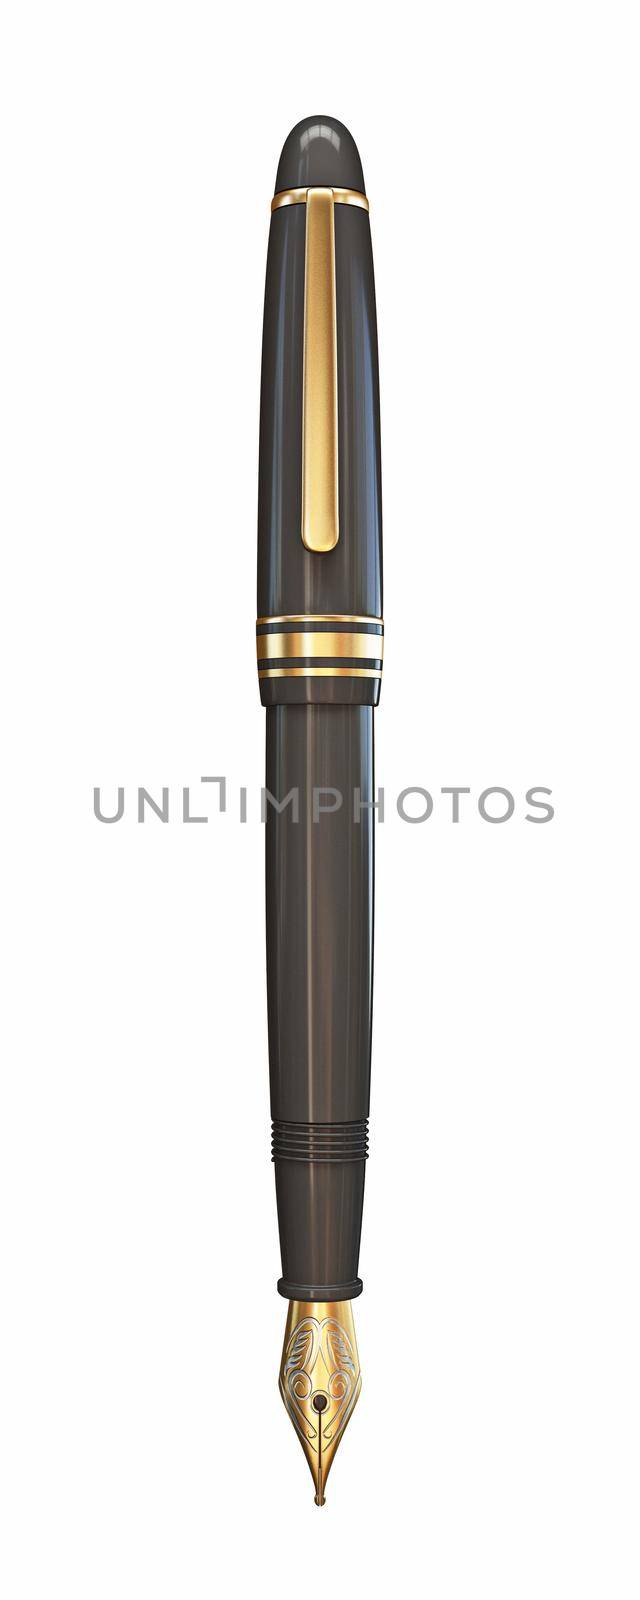 Fountain pen Vertical opened 3D render illustration isolated on white background